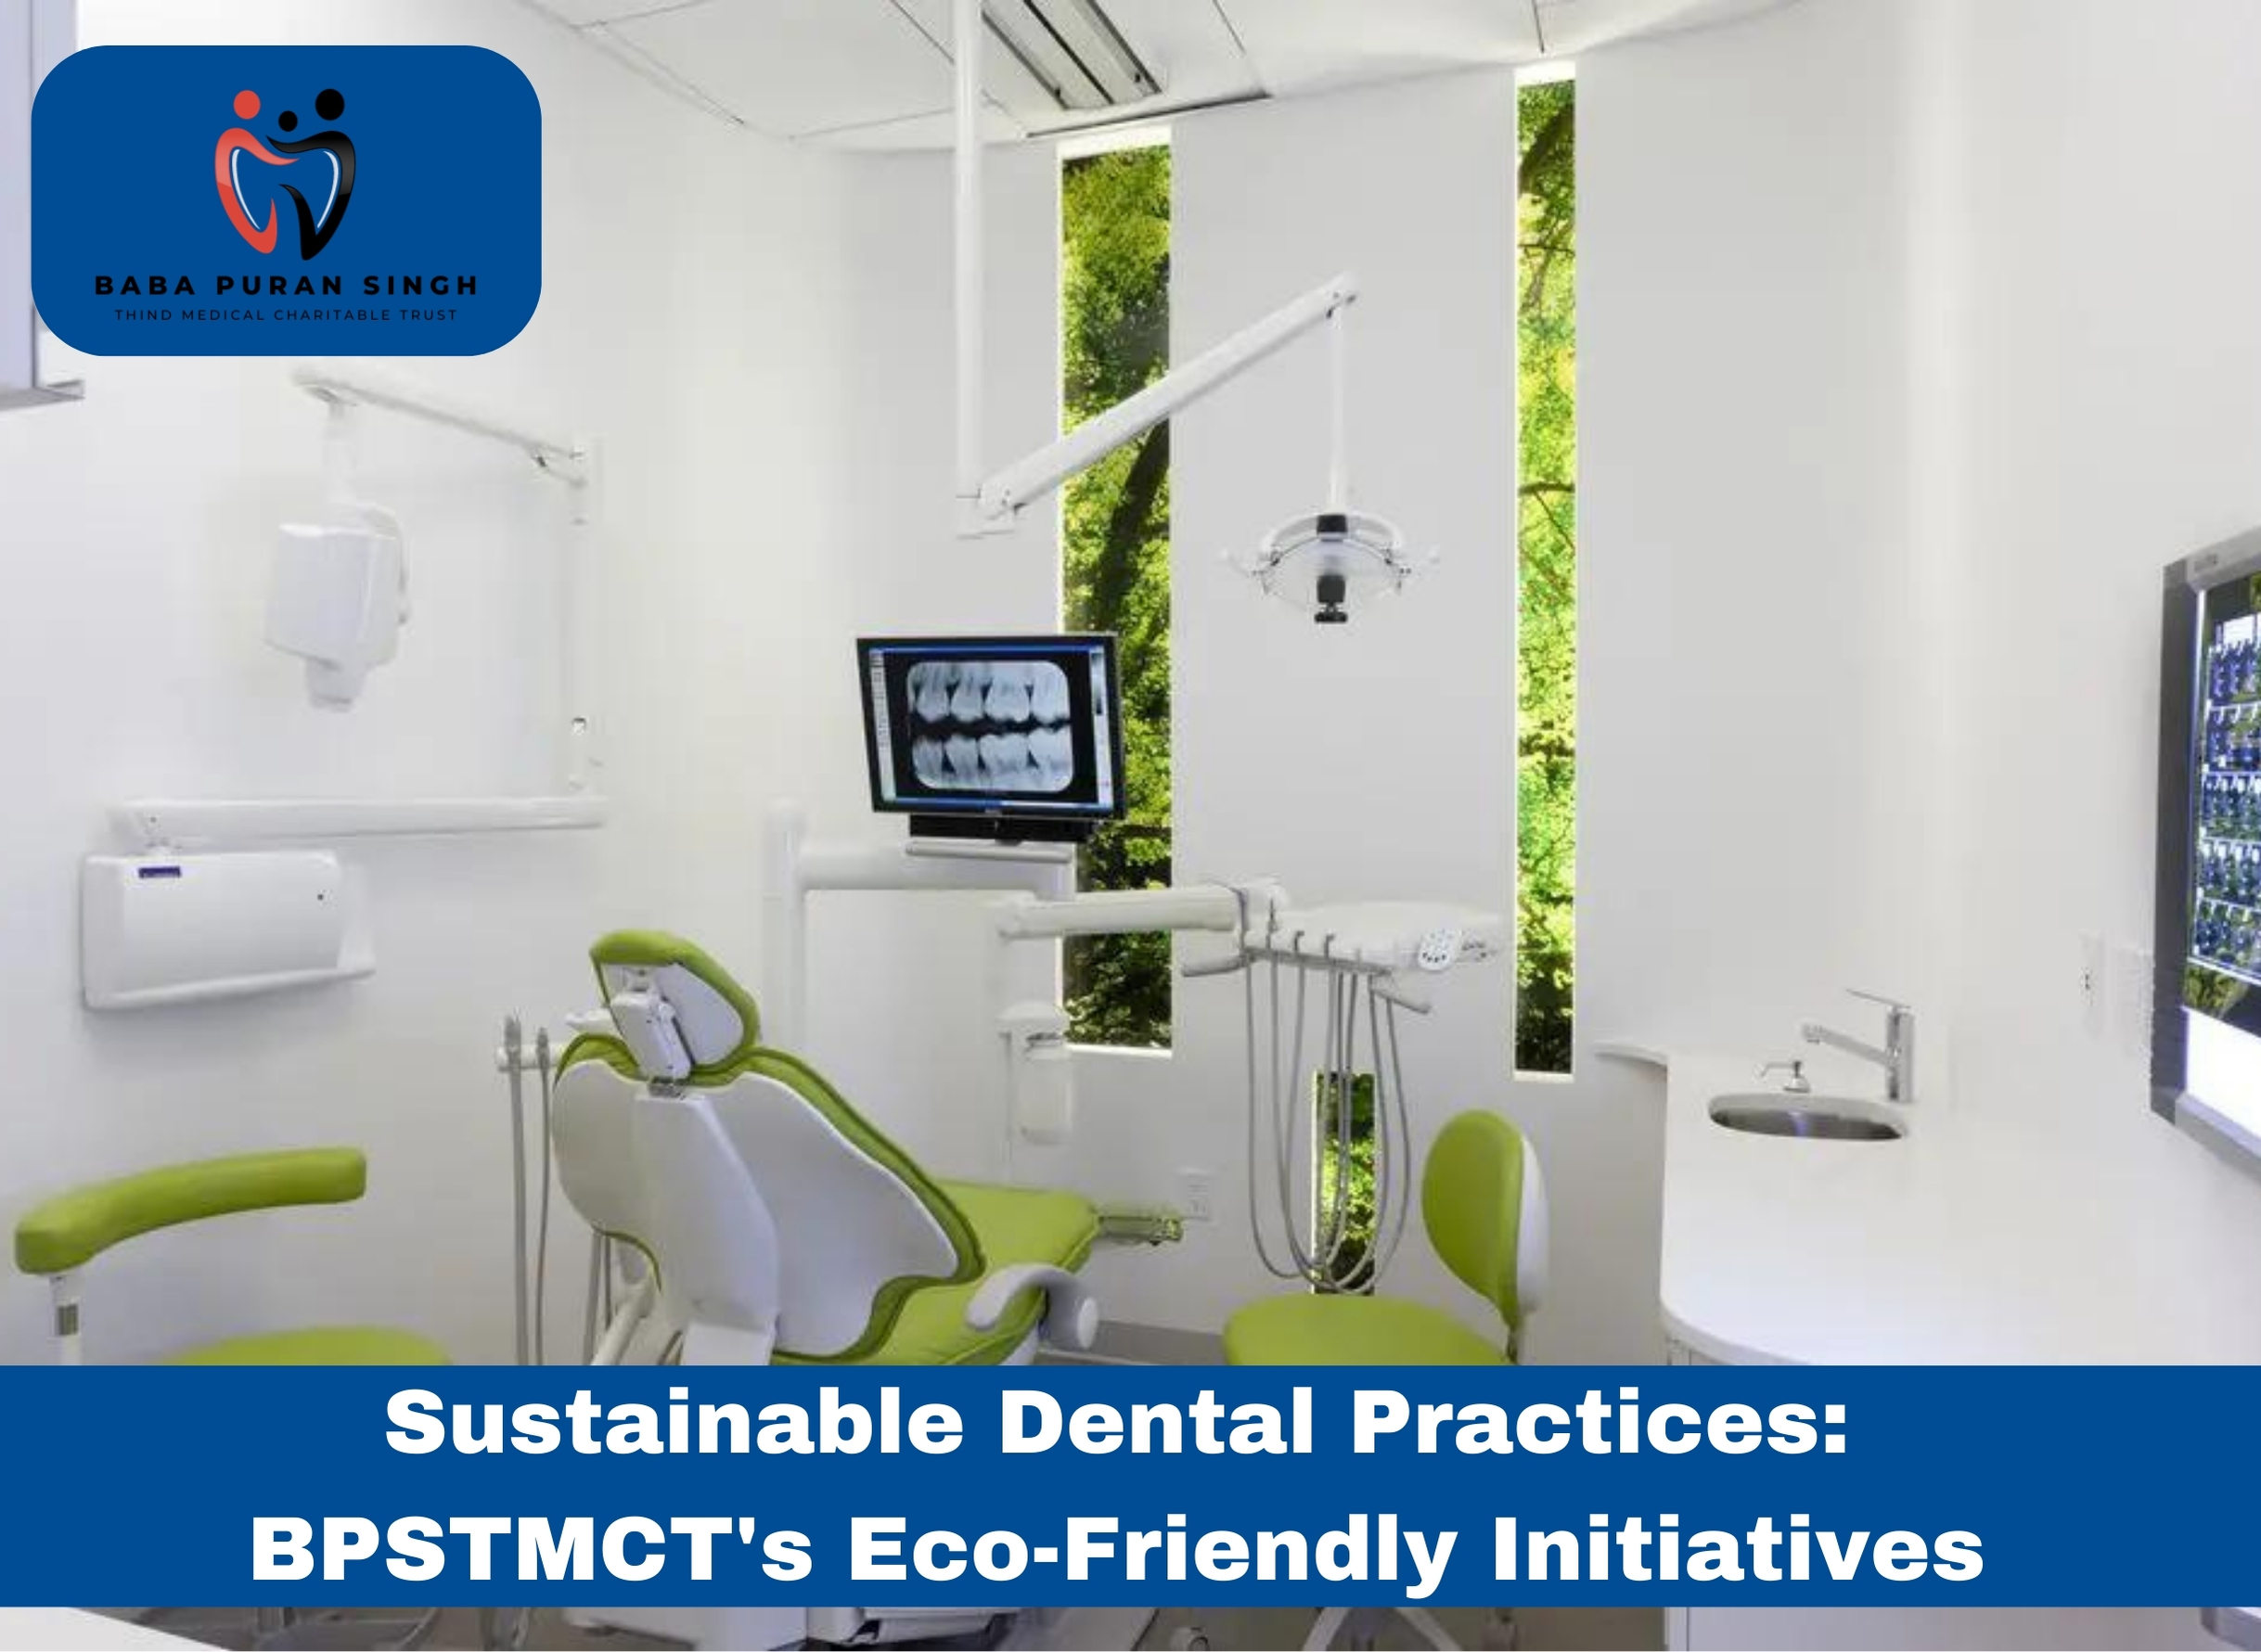 Sustainable Dental Practices: BPSTMCT’s Eco-Friendly Initiatives